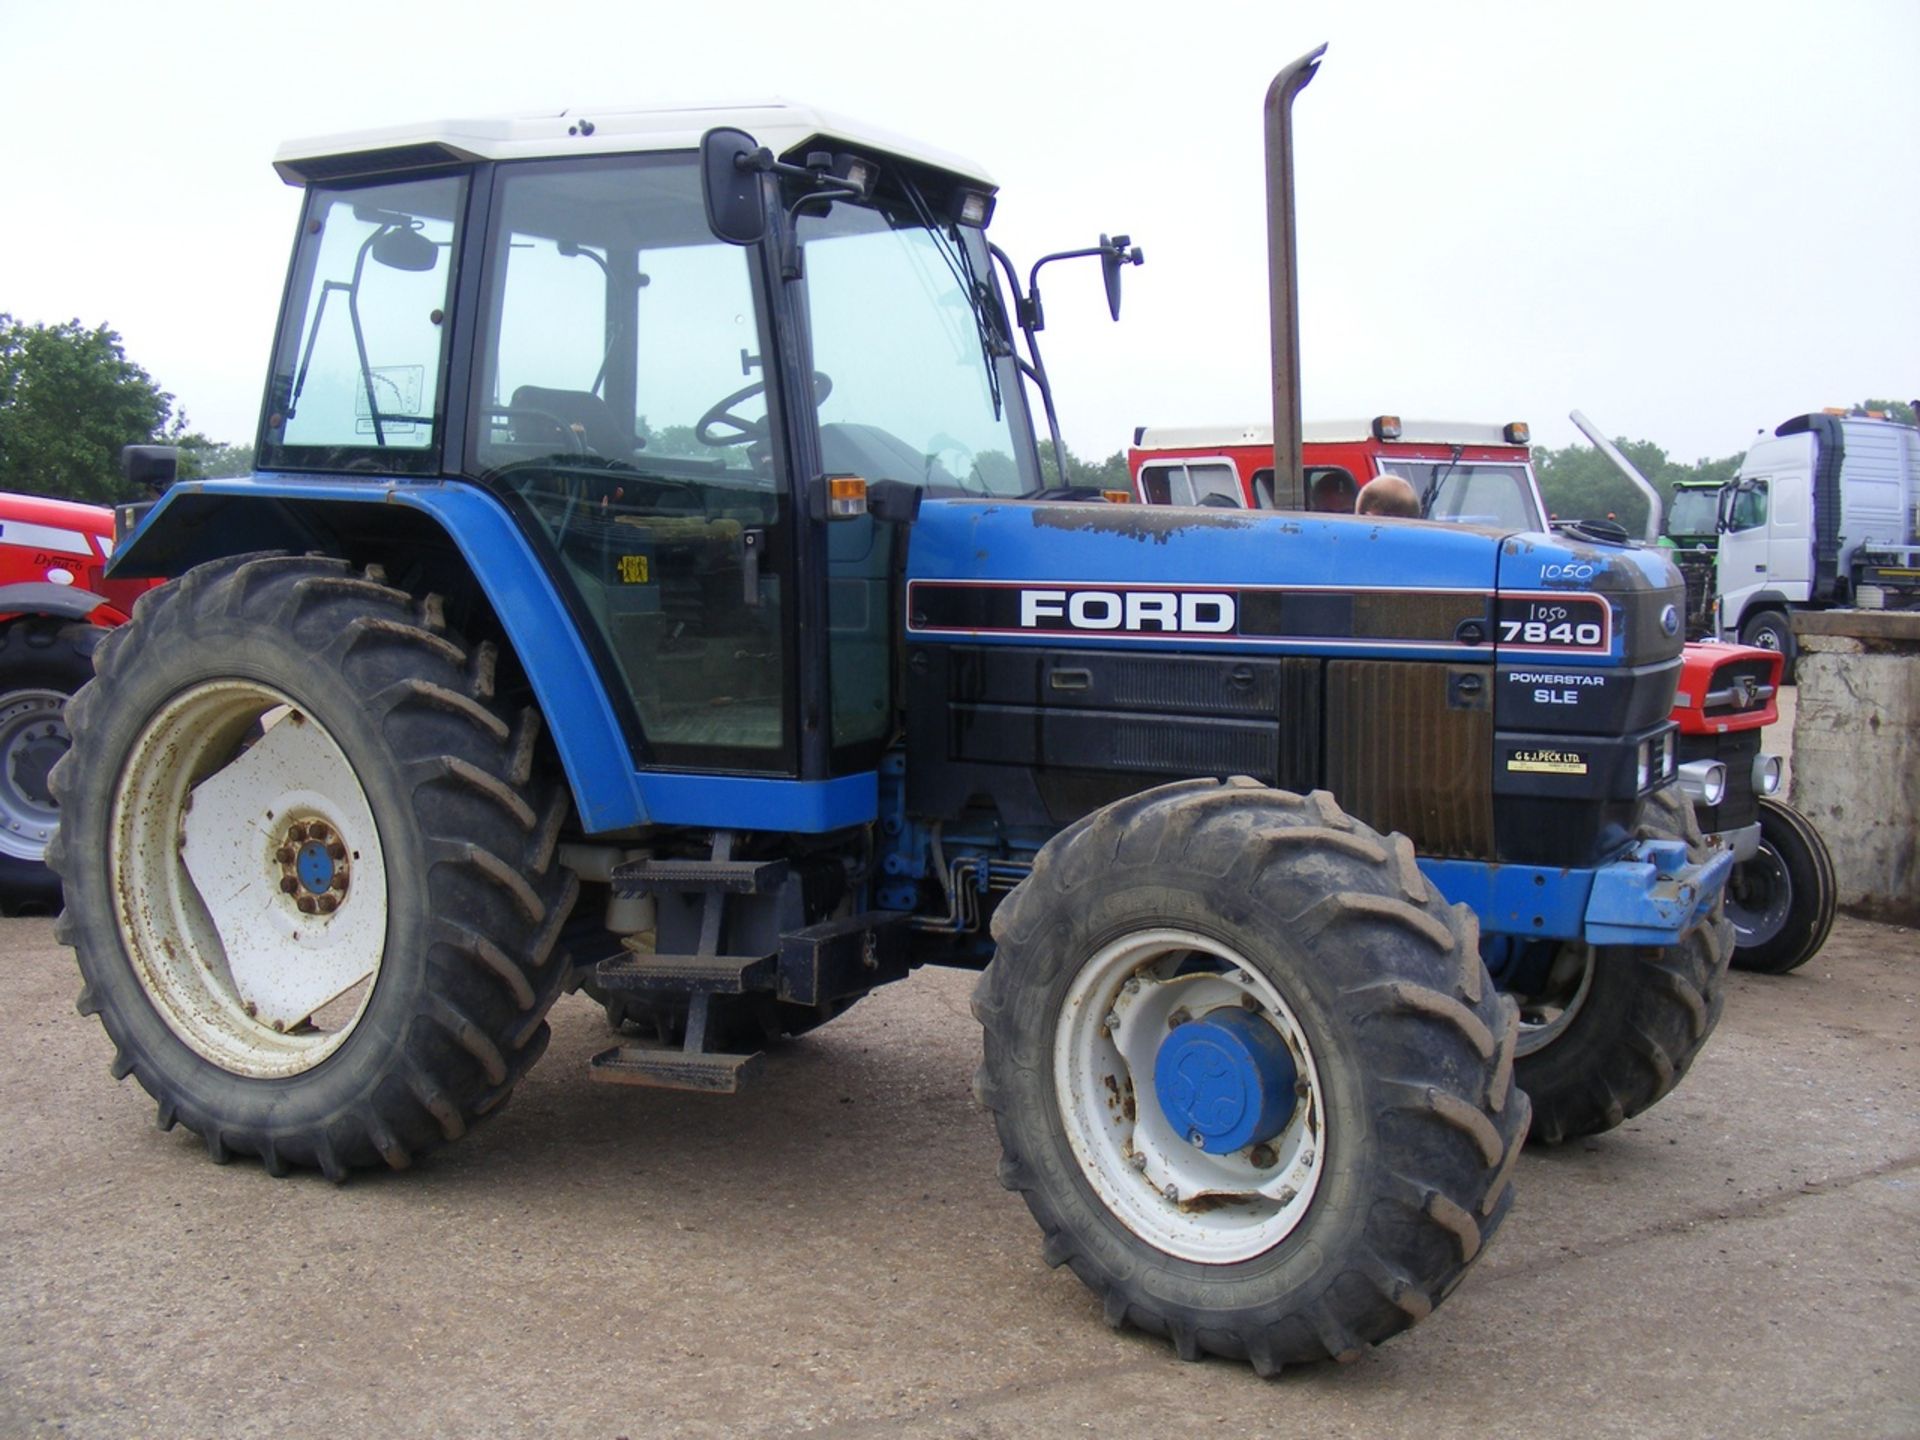 Ford 7840 4wd Tractor - Image 3 of 6